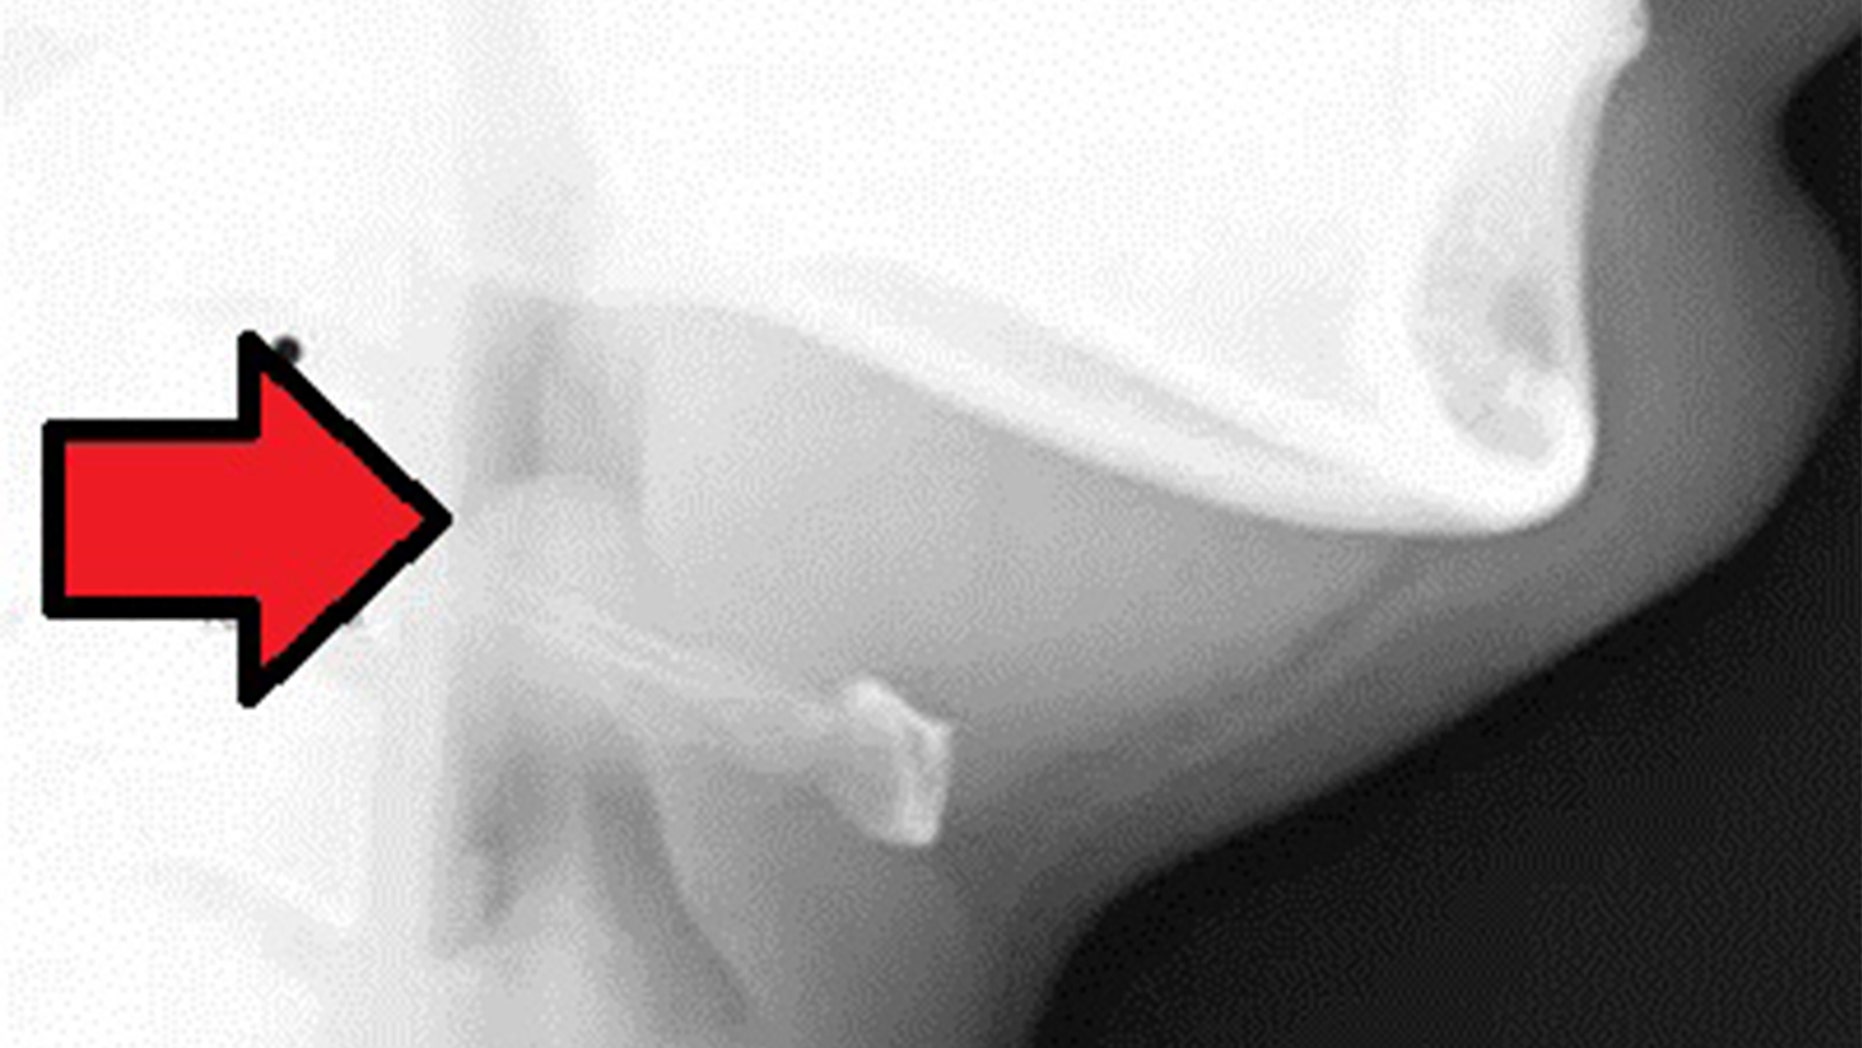 Acute epiglottitis; Lateral view in X-ray imaging. Lateral soft tissue radiography reveals the 